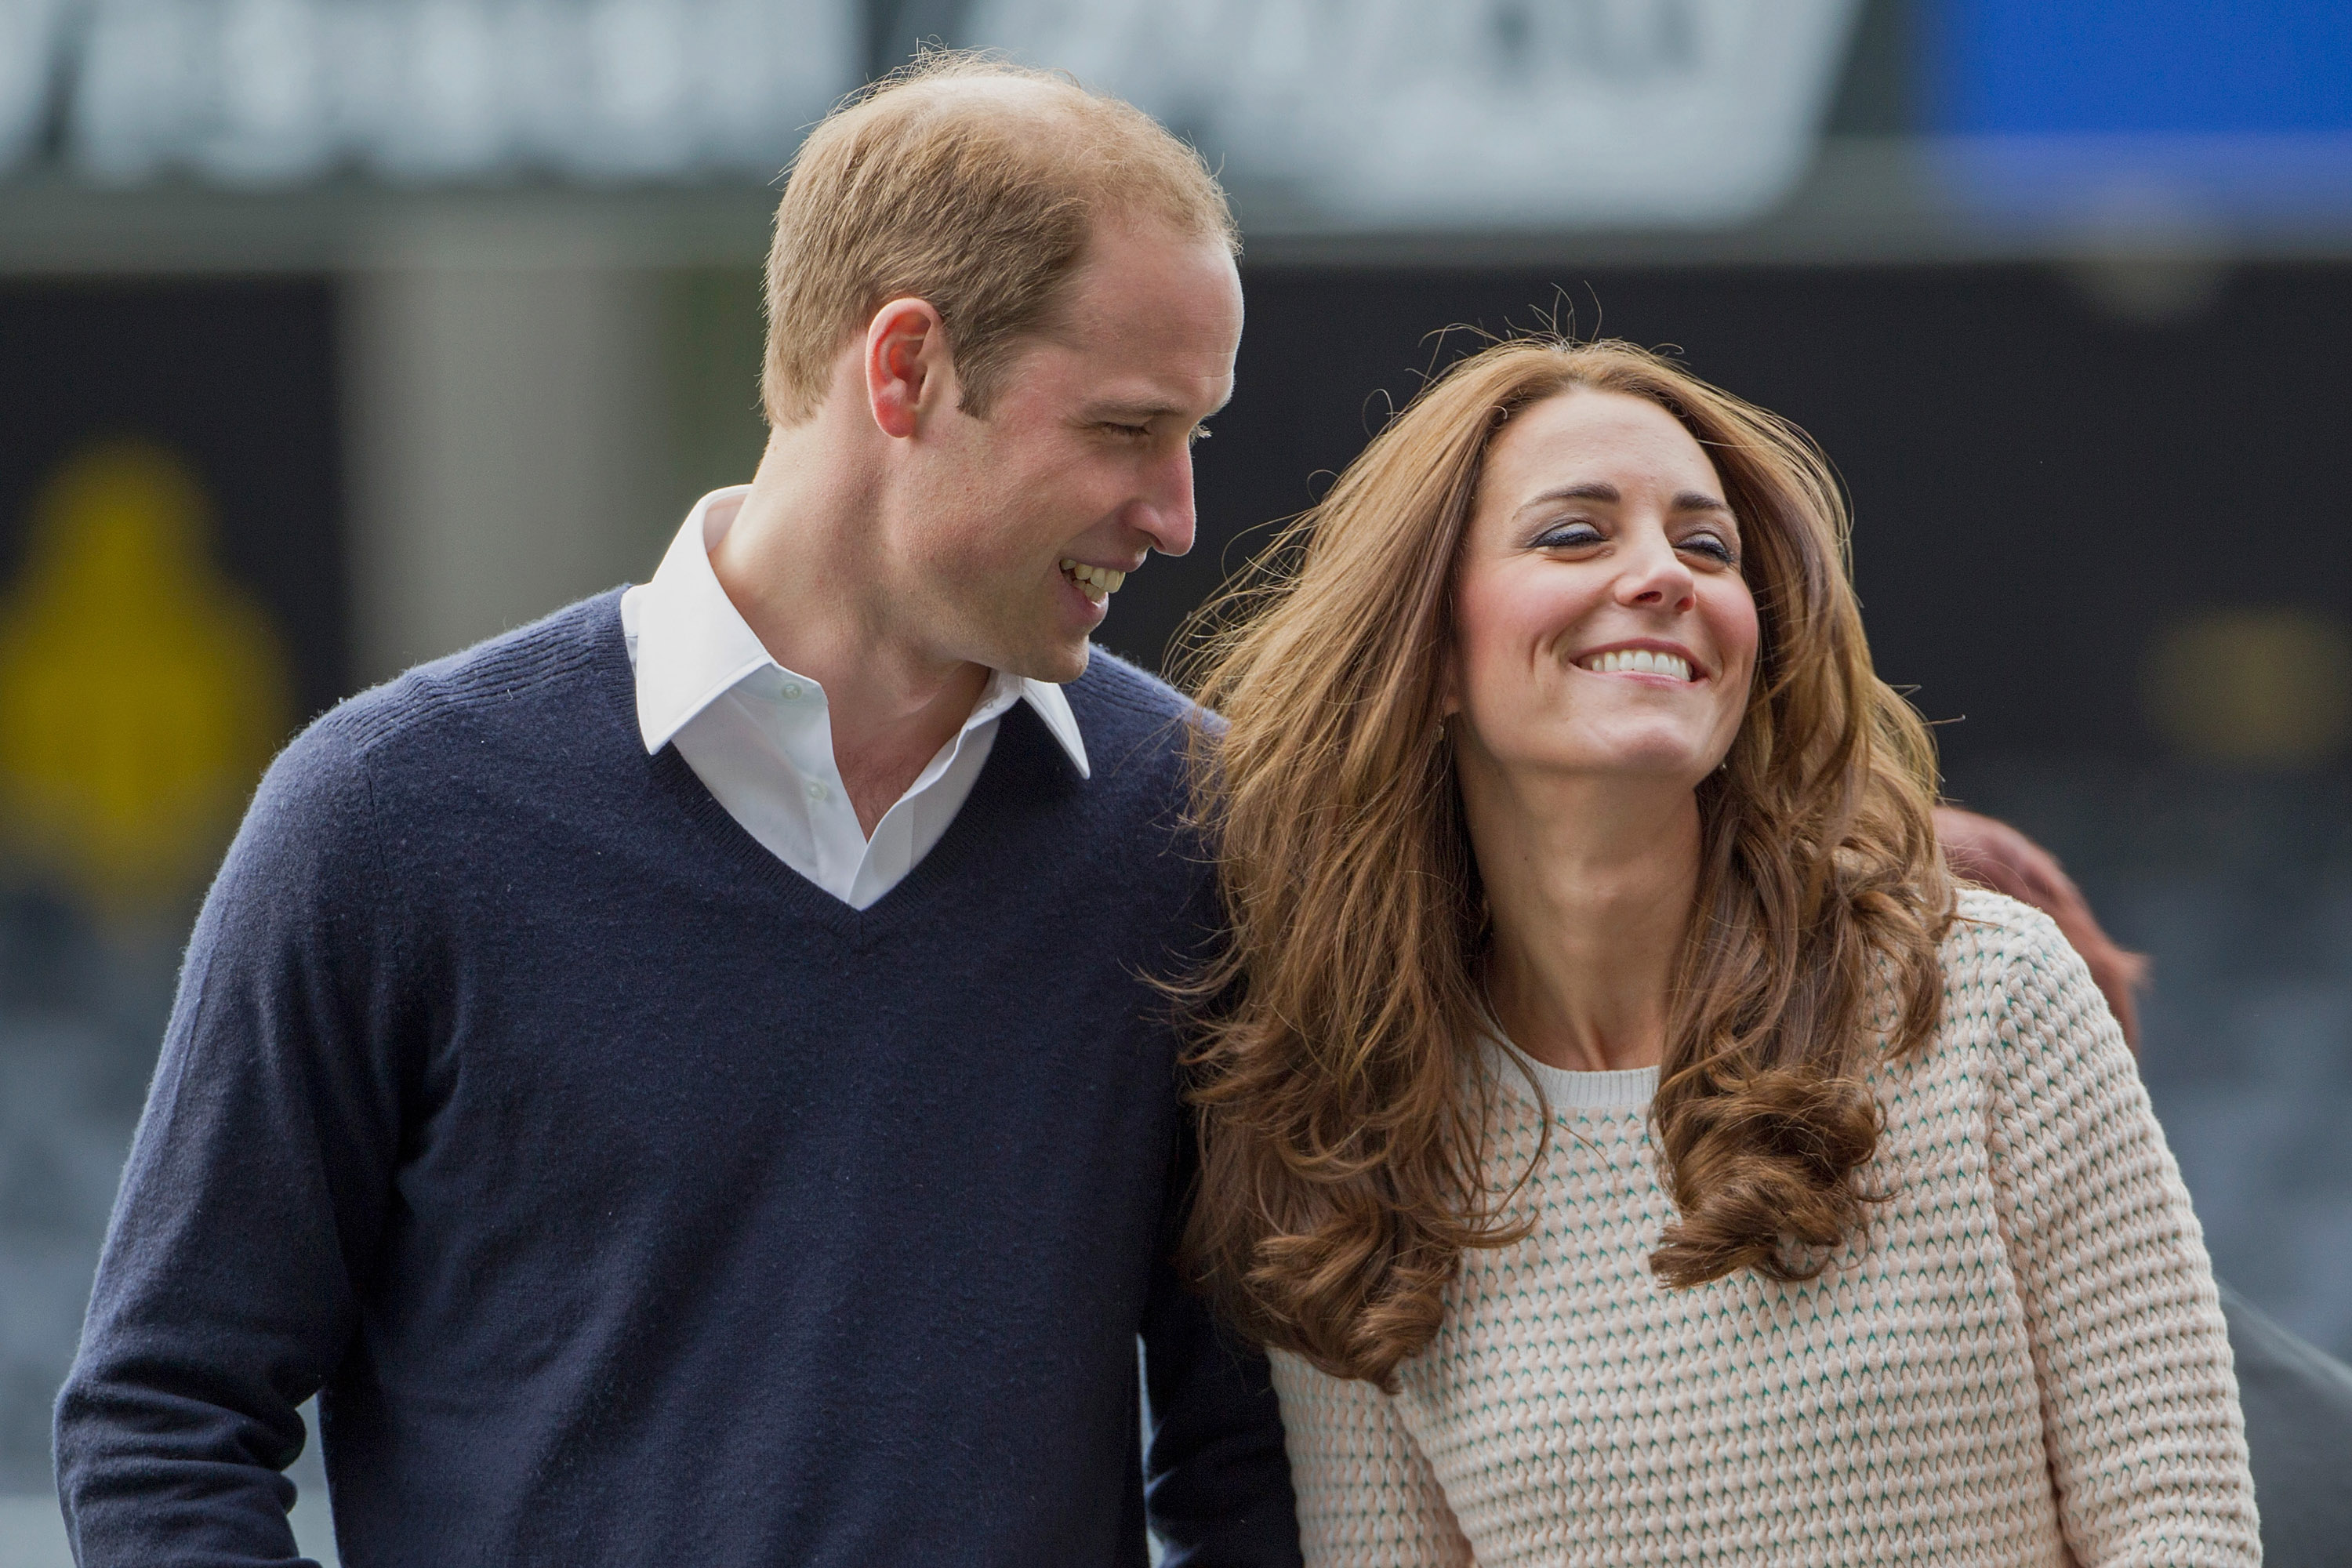 Prince William and Kate Middleton attend "Rippa Rugby" in the Forstyth Barr Stadium on day 7 of a Royal Tour to New Zealand on April 13, 2014 in Dunedin, New Zealand. | Source: Getty Images